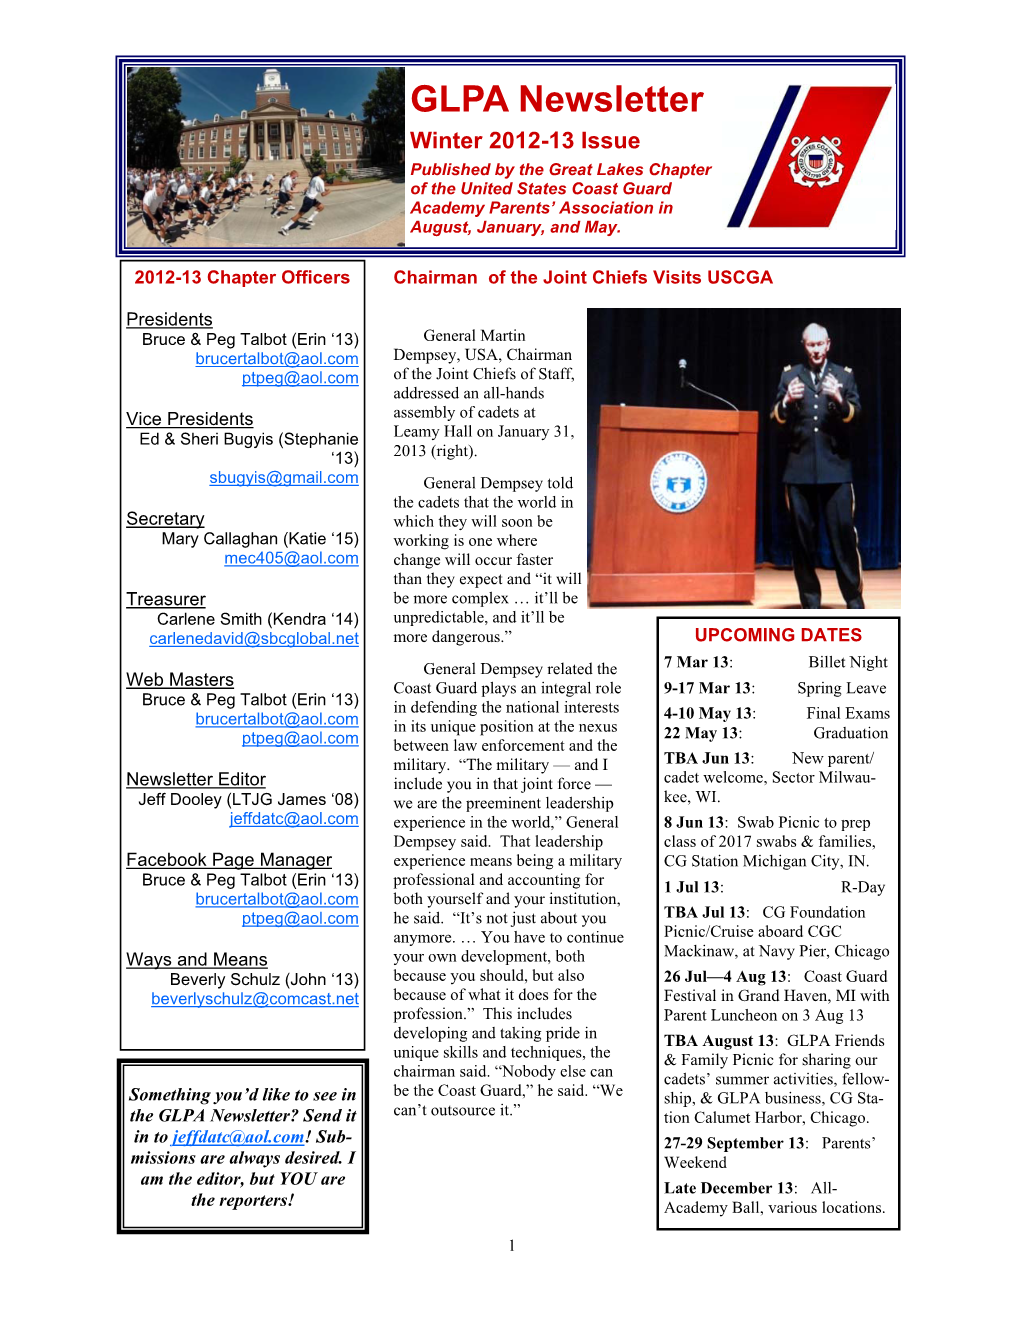 GLPA Newsletter Winter 2012-13 Issue Published by the Great Lakes Chapter of the United States Coast Guard Academy Parents’ Association in August, January, and May